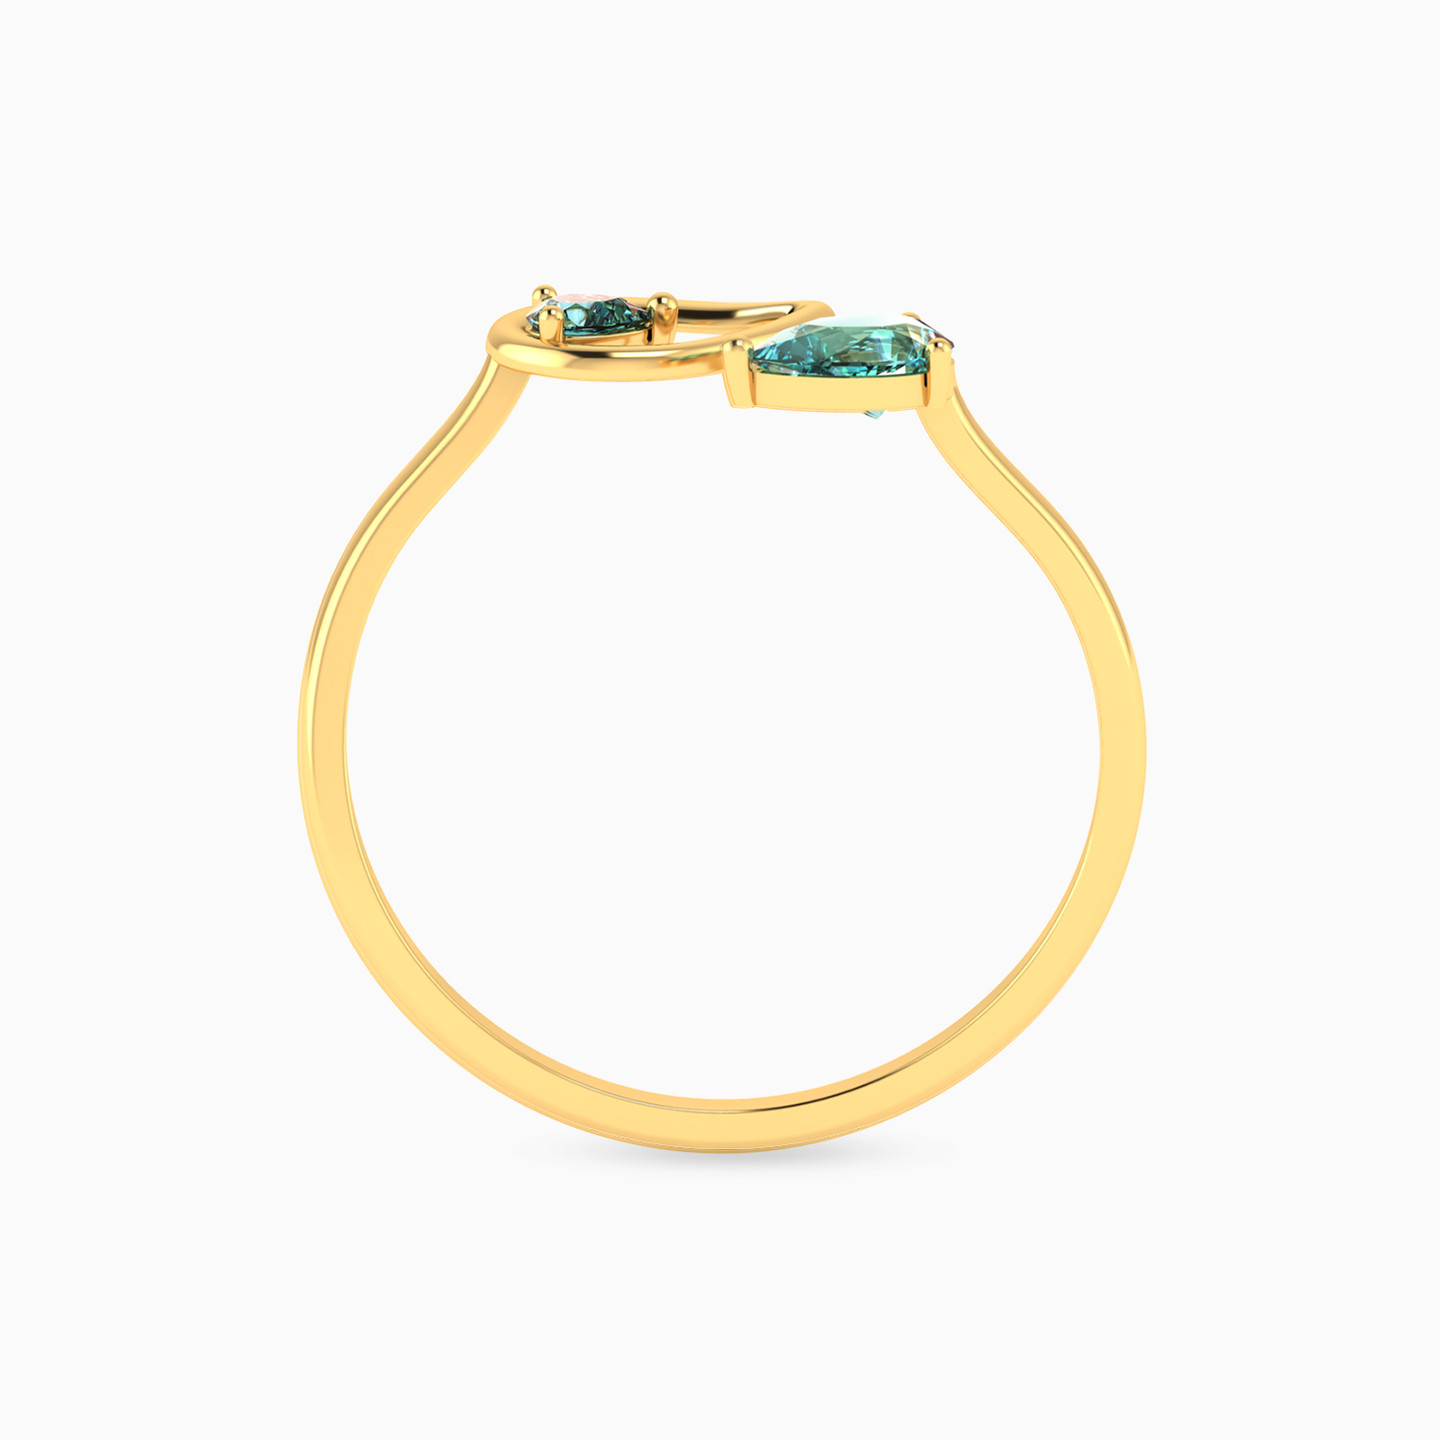 14K Gold Colored Stones Two-headed Ring - 3